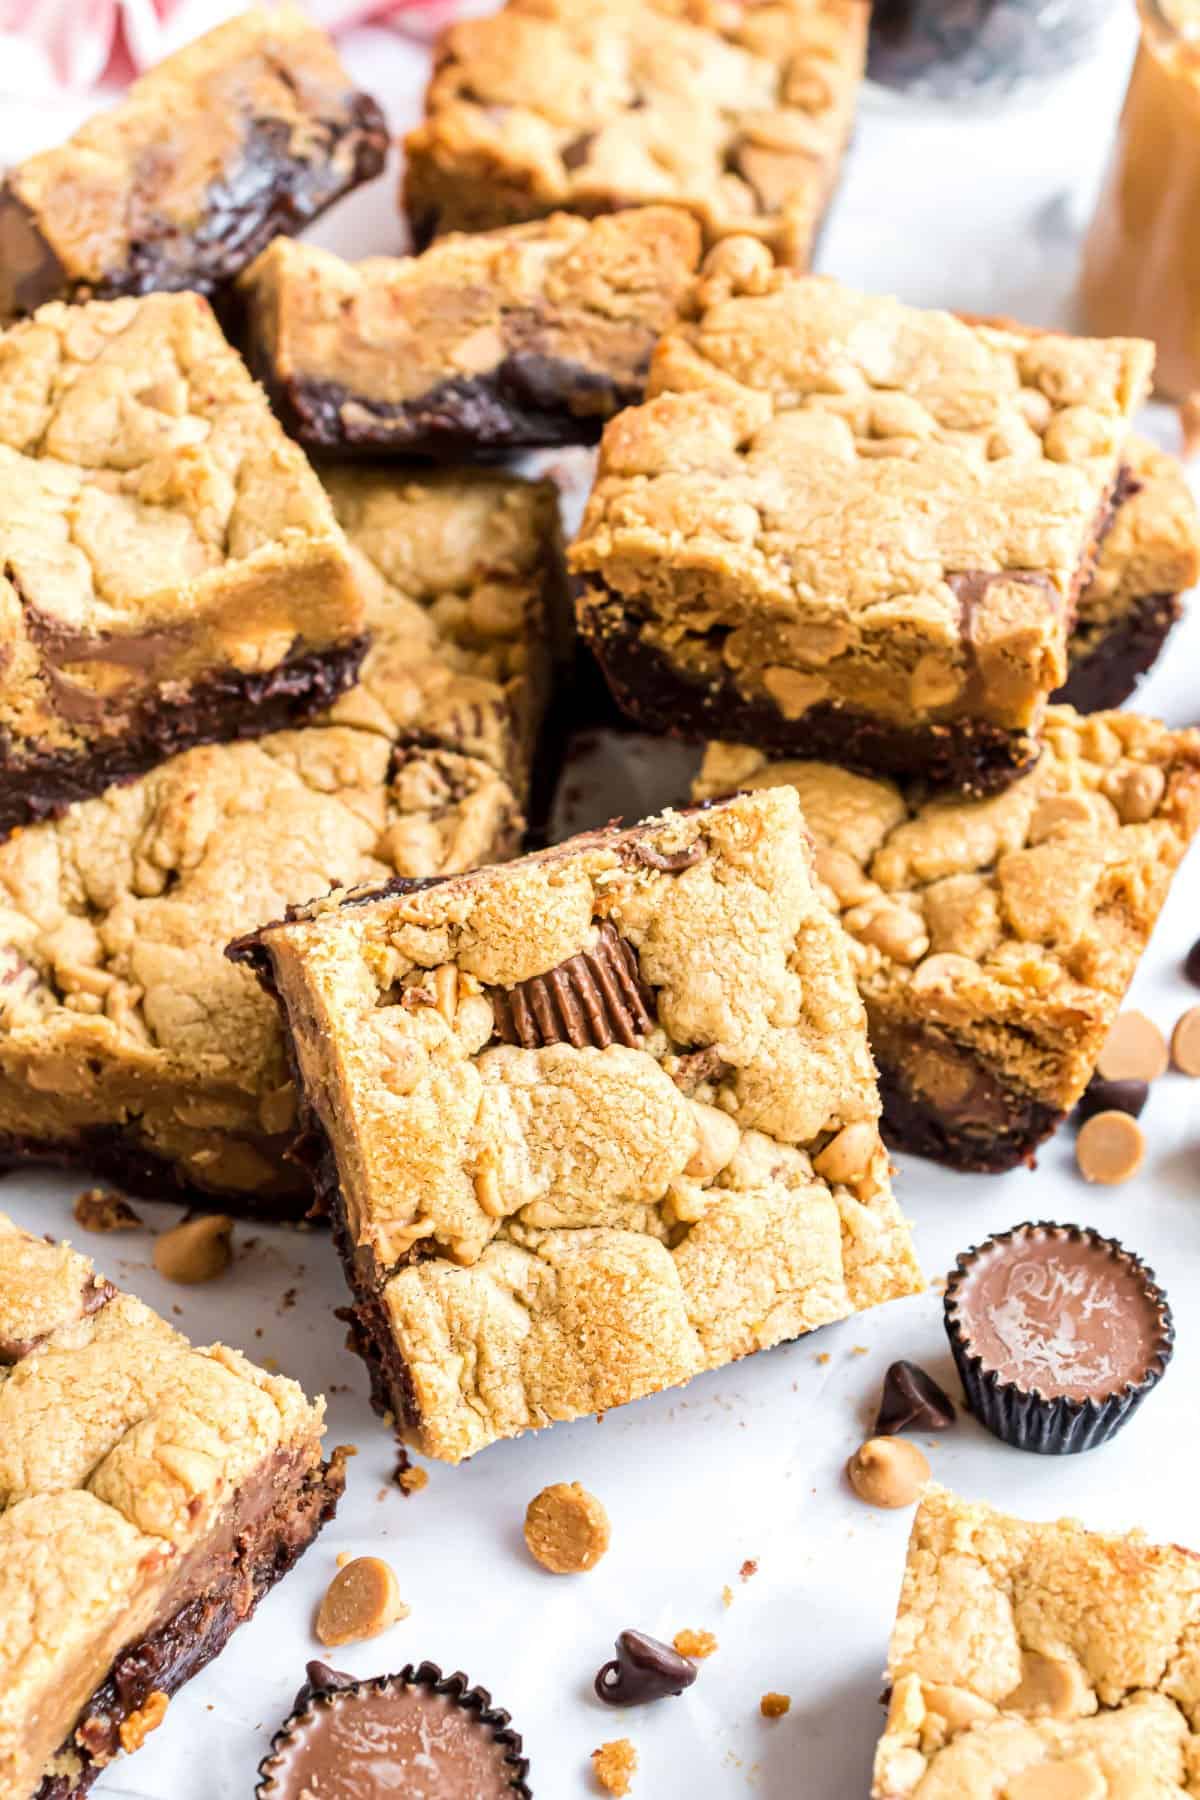 Peanut butter brookies cut into squares and stacked.